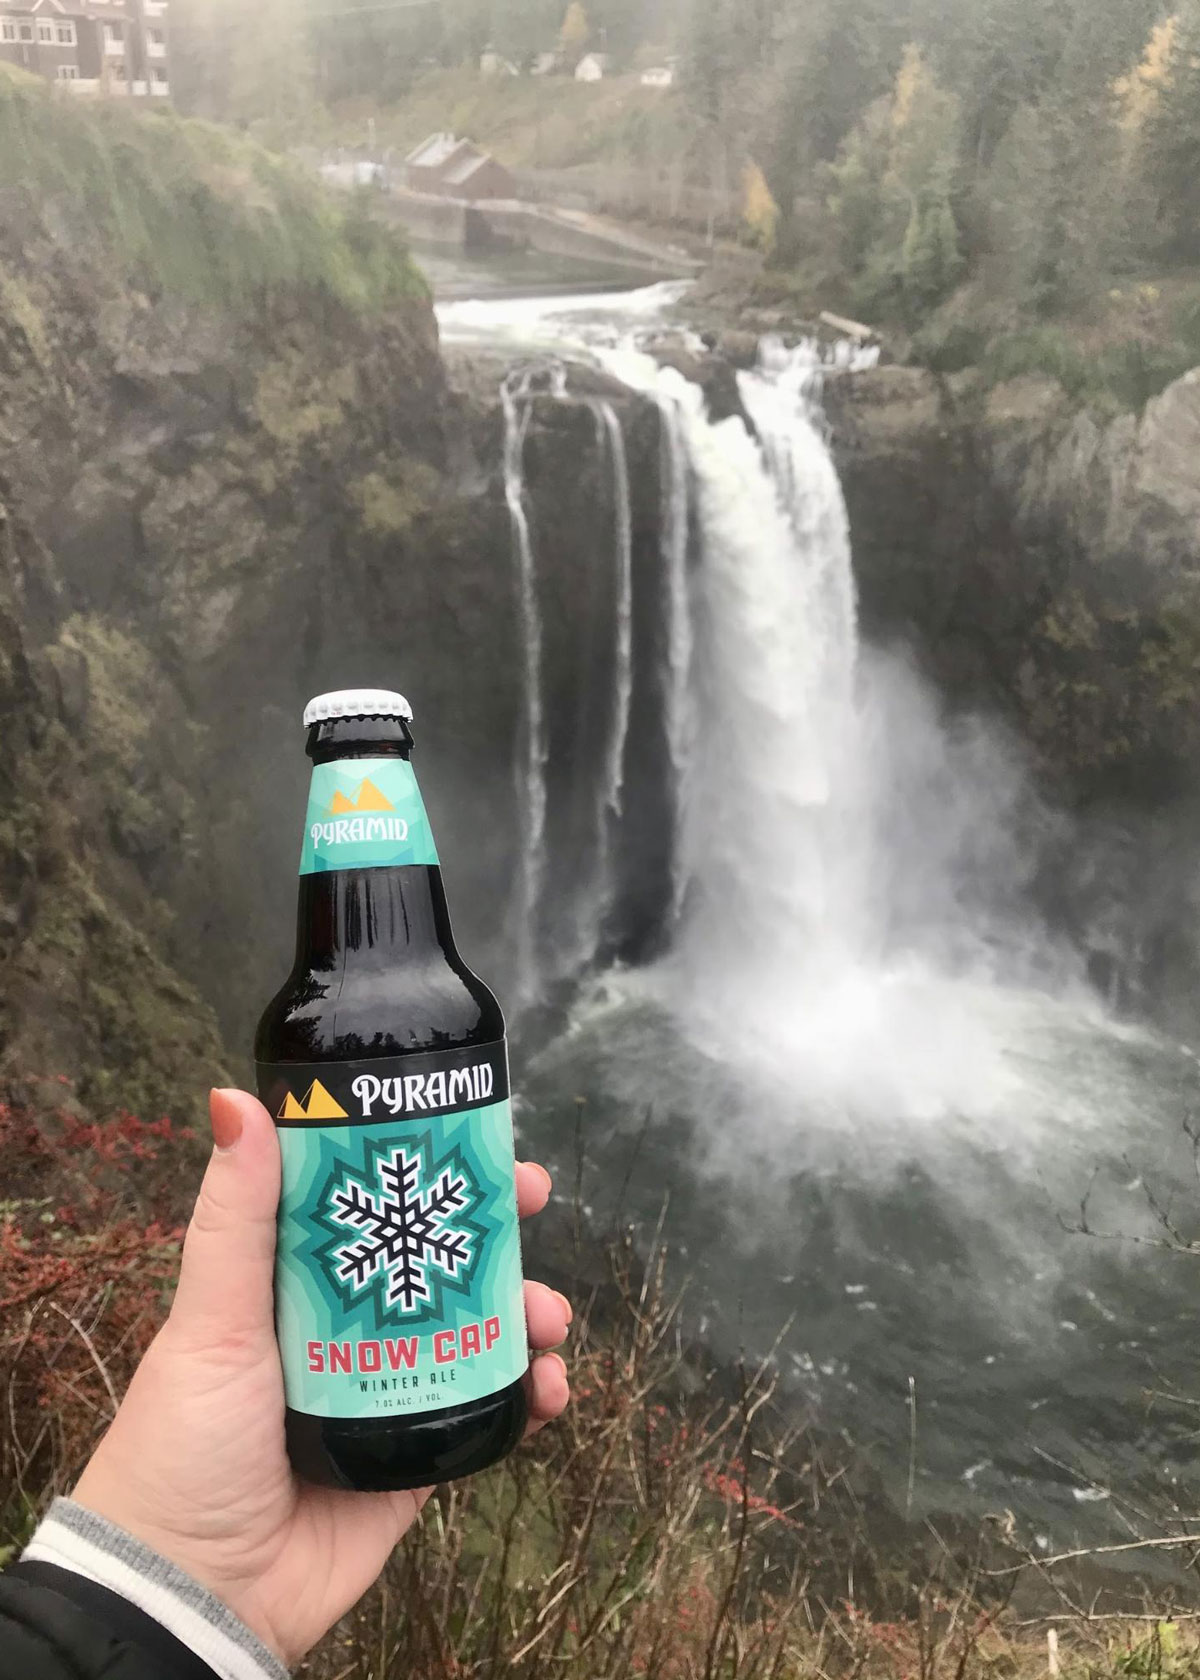 Snoqualimie Falls in the background, and a bottle of Pyramid Snow Cap Ale in the foreground